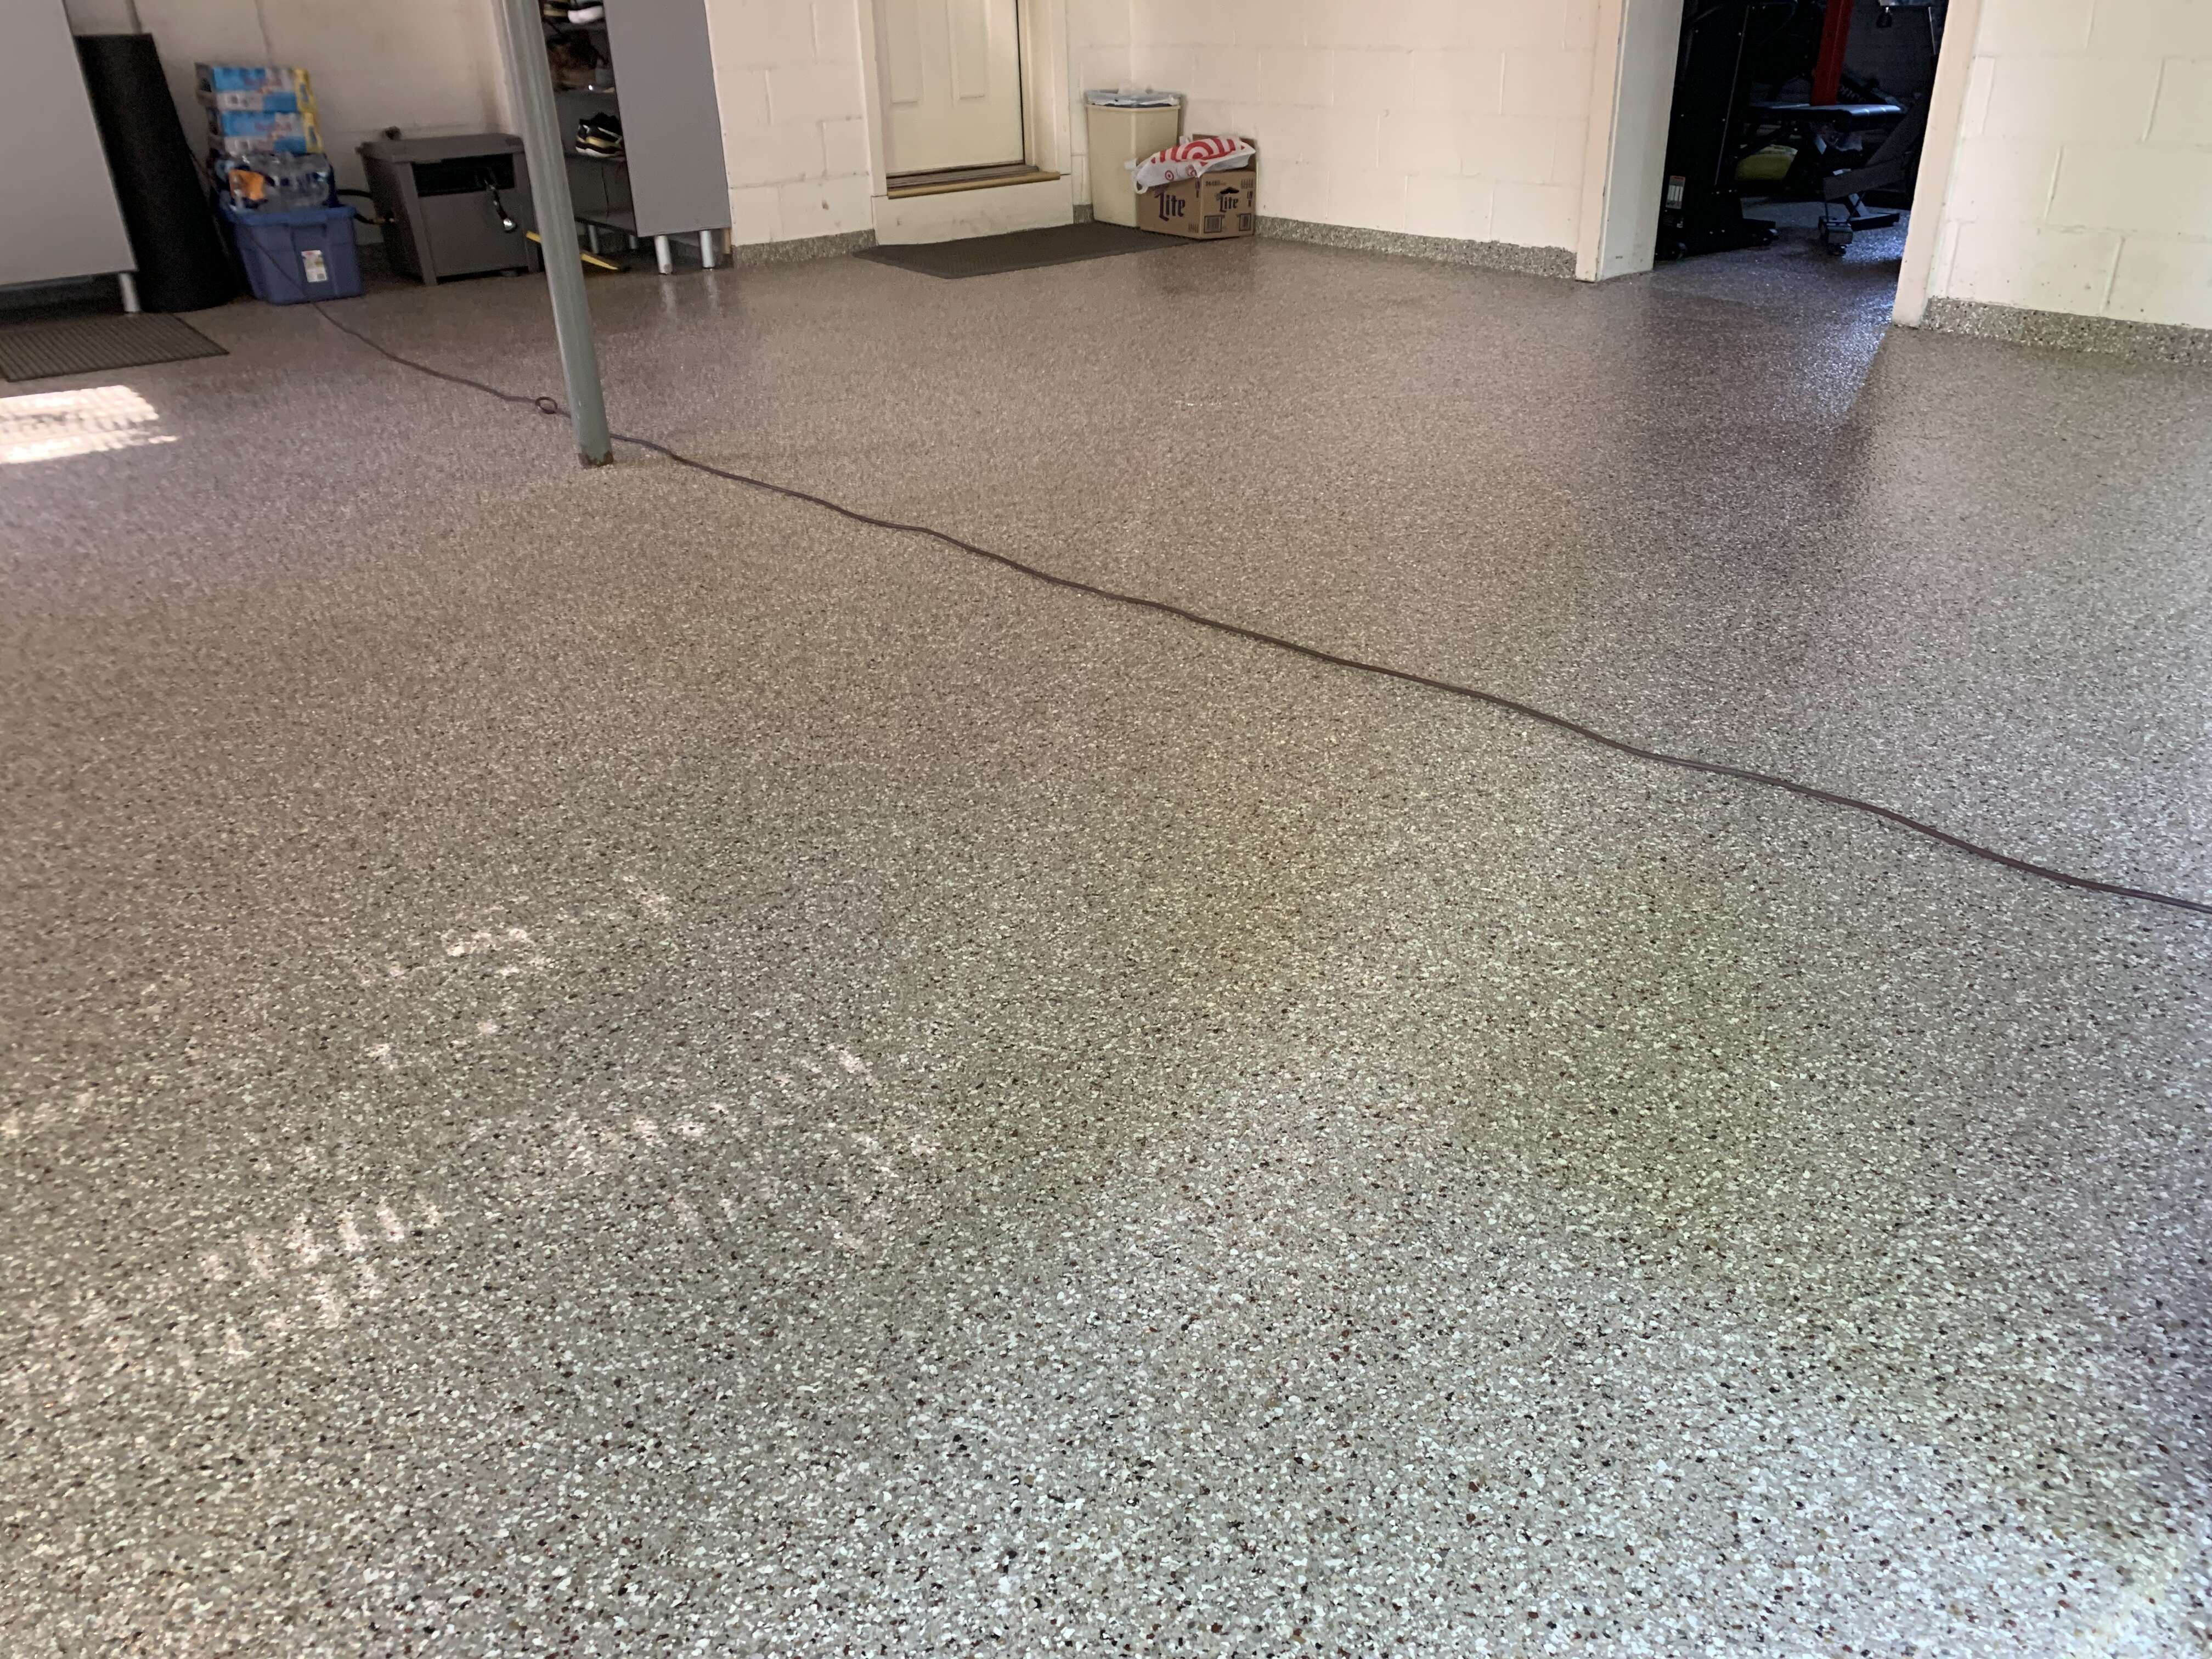 Residential Garage - Floors in a day